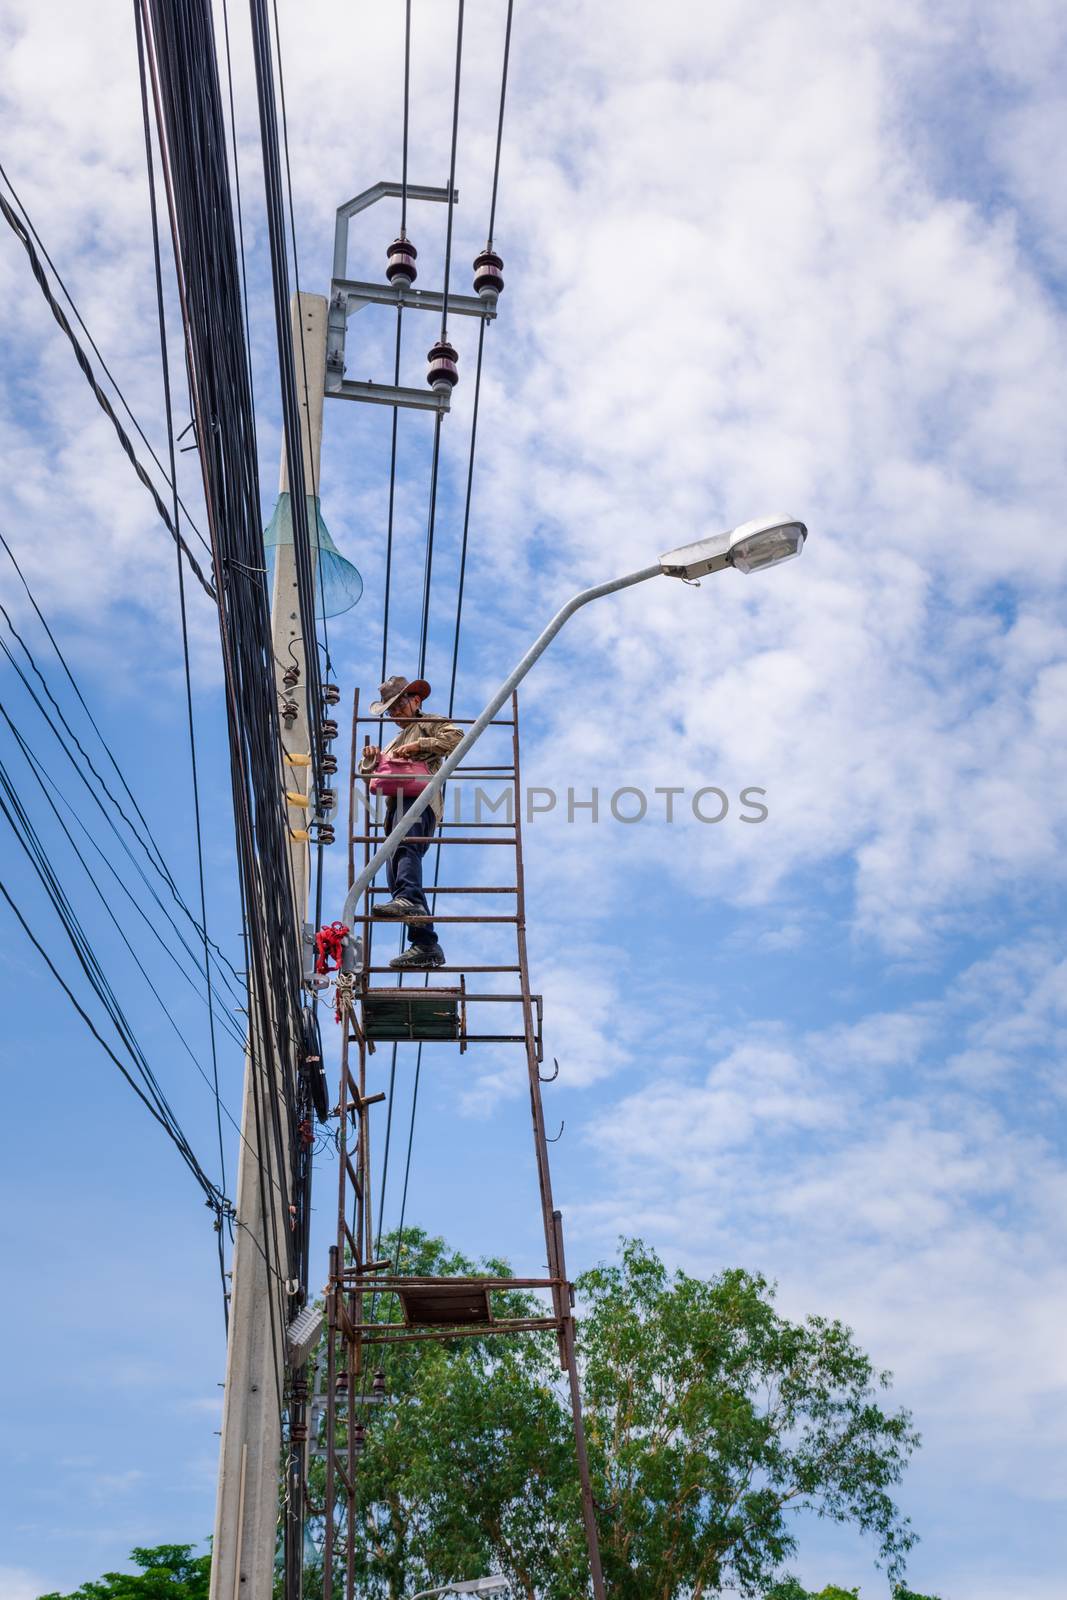 Electricians risk working install electric line by PongMoji